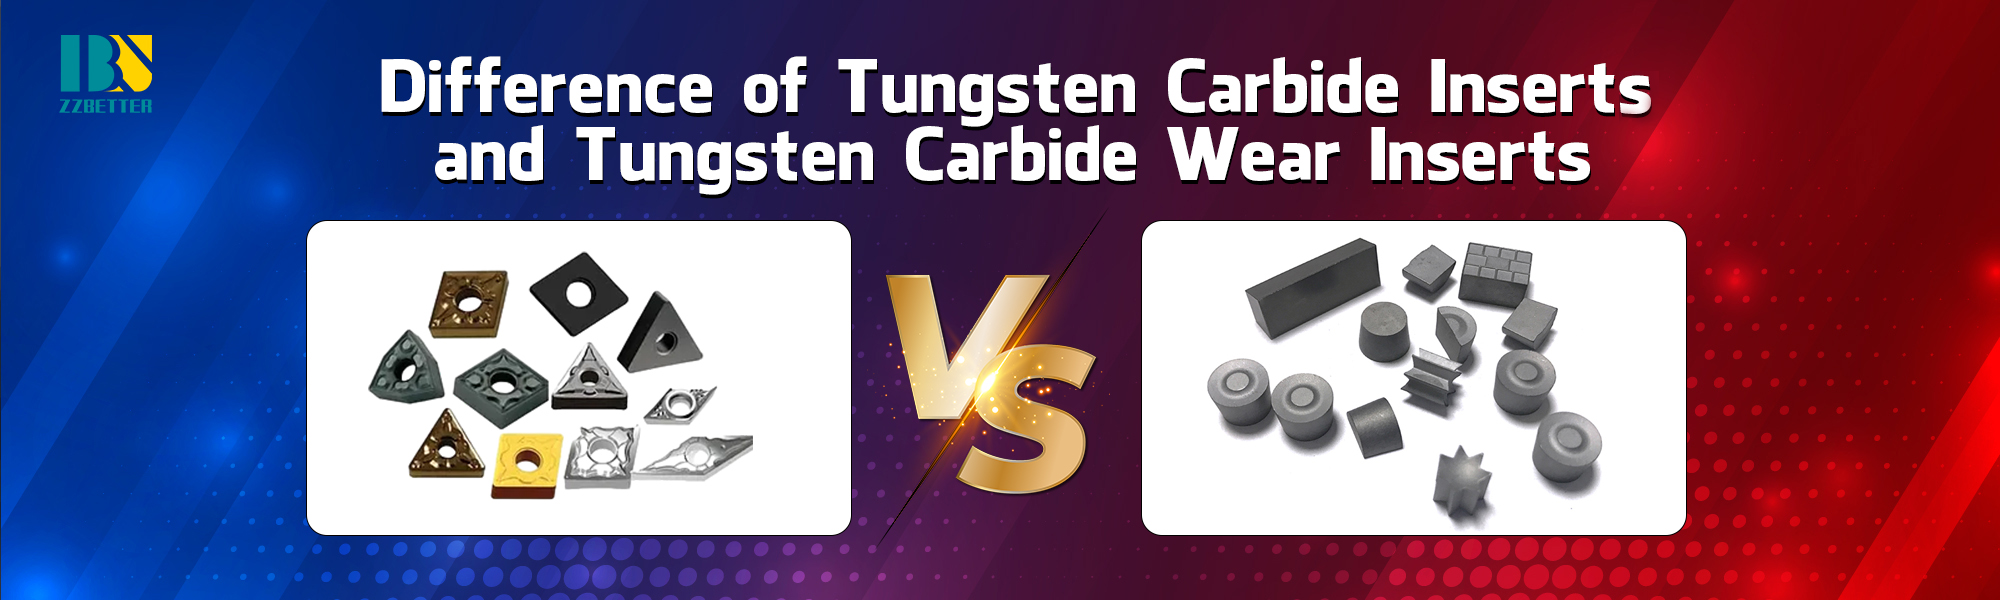  Difference of Tungsten Carbide Inserts and Tungsten Carbide Wear Insert Tungsten carbide inserts and Tungsten carbide wear inserts are essentially the same and are often used interchangeably. However, if we want to highlight a potential difference, it could be in the context of their specific application or use. Tungsten carbide inserts, in a broader sense, refer to the cutting tool inserts made from tungsten carbide material. These inserts can be used for various purposes, including turning, milling, drilling, and other machining operations. They are known for their hardness and wear resistance, allowing for efficient material removal during the cutting process. On the other hand, Tungsten carbide wear inserts specifically emphasize their role in wear-resistant applications. These inserts are designed and optimized to withstand abrasive wear, erosion, and other forms of material degradation that occur during high-wear operations.  Tungsten carbide wear inserts are commonly used in heavy-duty applications, such as mining, construction, and certain manufacturing processes where the workpiece or abrasive materials cause significant wear on the cutting tools. In summary, while tungsten carbide inserts and tungsten carbide wear inserts are generally the same thing, the term 